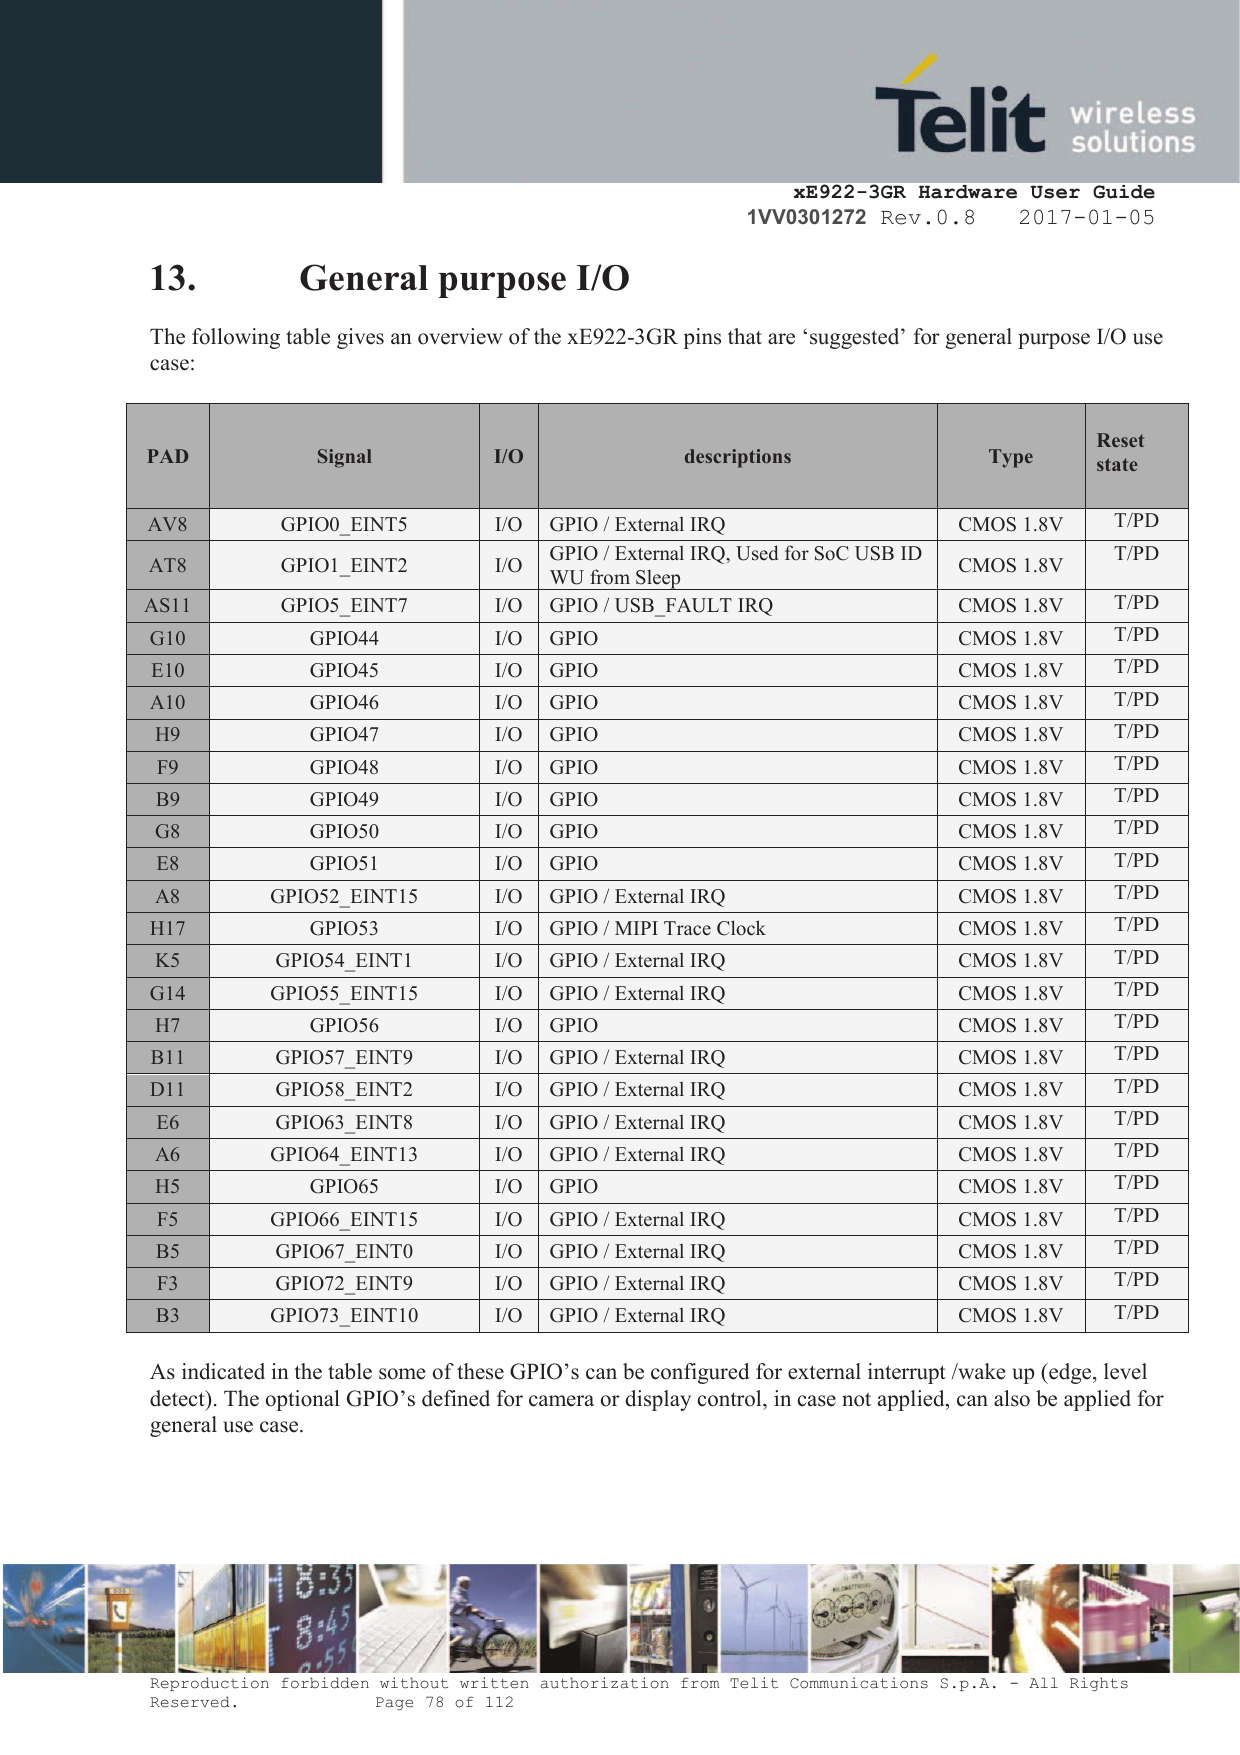     xE922-3GR Hardware User Guide 1VV0301272 Rev.0.8   2017-01-05 Reproduction forbidden without written authorization from Telit Communications S.p.A. - All Rights Reserved.    Page 78 of 112  13. General purpose I/O The following table gives an overview of the xE922-3GR pins that are ‘suggested’ for general purpose I/O use case:  PAD Signal I/O descriptions  Type  Reset state AV8 GPIO0_EINT5 I/O GPIO / External IRQ CMOS 1.8V T/PD AT8 GPIO1_EINT2 I/O GPIO / External IRQ, Used for SoC USB ID WU from Sleep CMOS 1.8V T/PD AS11 GPIO5_EINT7 I/O GPIO / USB_FAULT IRQ CMOS 1.8V T/PD G10 GPIO44 I/O GPIO  CMOS 1.8V T/PD E10 GPIO45 I/O GPIO  CMOS 1.8V T/PD A10 GPIO46 I/O GPIO  CMOS 1.8V T/PD H9 GPIO47 I/O GPIO  CMOS 1.8V T/PD F9 GPIO48 I/O GPIO  CMOS 1.8V T/PD B9 GPIO49 I/O GPIO  CMOS 1.8V T/PD G8 GPIO50 I/O GPIO  CMOS 1.8V T/PD E8 GPIO51 I/O GPIO  CMOS 1.8V T/PD A8 GPIO52_EINT15 I/O GPIO / External IRQ CMOS 1.8V T/PD H17 GPIO53 I/O GPIO / MIPI Trace Clock CMOS 1.8V T/PD K5 GPIO54_EINT1 I/O GPIO / External IRQ CMOS 1.8V T/PD G14 GPIO55_EINT15 I/O GPIO / External IRQ CMOS 1.8V T/PD H7 GPIO56 I/O GPIO CMOS 1.8V T/PD B11 GPIO57_EINT9 I/O GPIO / External IRQ CMOS 1.8V T/PD D11 GPIO58_EINT2 I/O GPIO / External IRQ CMOS 1.8V T/PD E6 GPIO63_EINT8 I/O GPIO / External IRQ CMOS 1.8V T/PD A6 GPIO64_EINT13 I/O GPIO / External IRQ CMOS 1.8V T/PD H5 GPIO65 I/O GPIO CMOS 1.8V T/PD F5 GPIO66_EINT15 I/O GPIO / External IRQ CMOS 1.8V T/PD B5 GPIO67_EINT0 I/O GPIO / External IRQ CMOS 1.8V T/PD F3 GPIO72_EINT9 I/O GPIO / External IRQ CMOS 1.8V T/PD B3 GPIO73_EINT10 I/O GPIO / External IRQ CMOS 1.8V T/PD  As indicated in the table some of these GPIO’s can be configured for external interrupt /wake up (edge, level detect). The optional GPIO’s defined for camera or display control, in case not applied, can also be applied for general use case.       